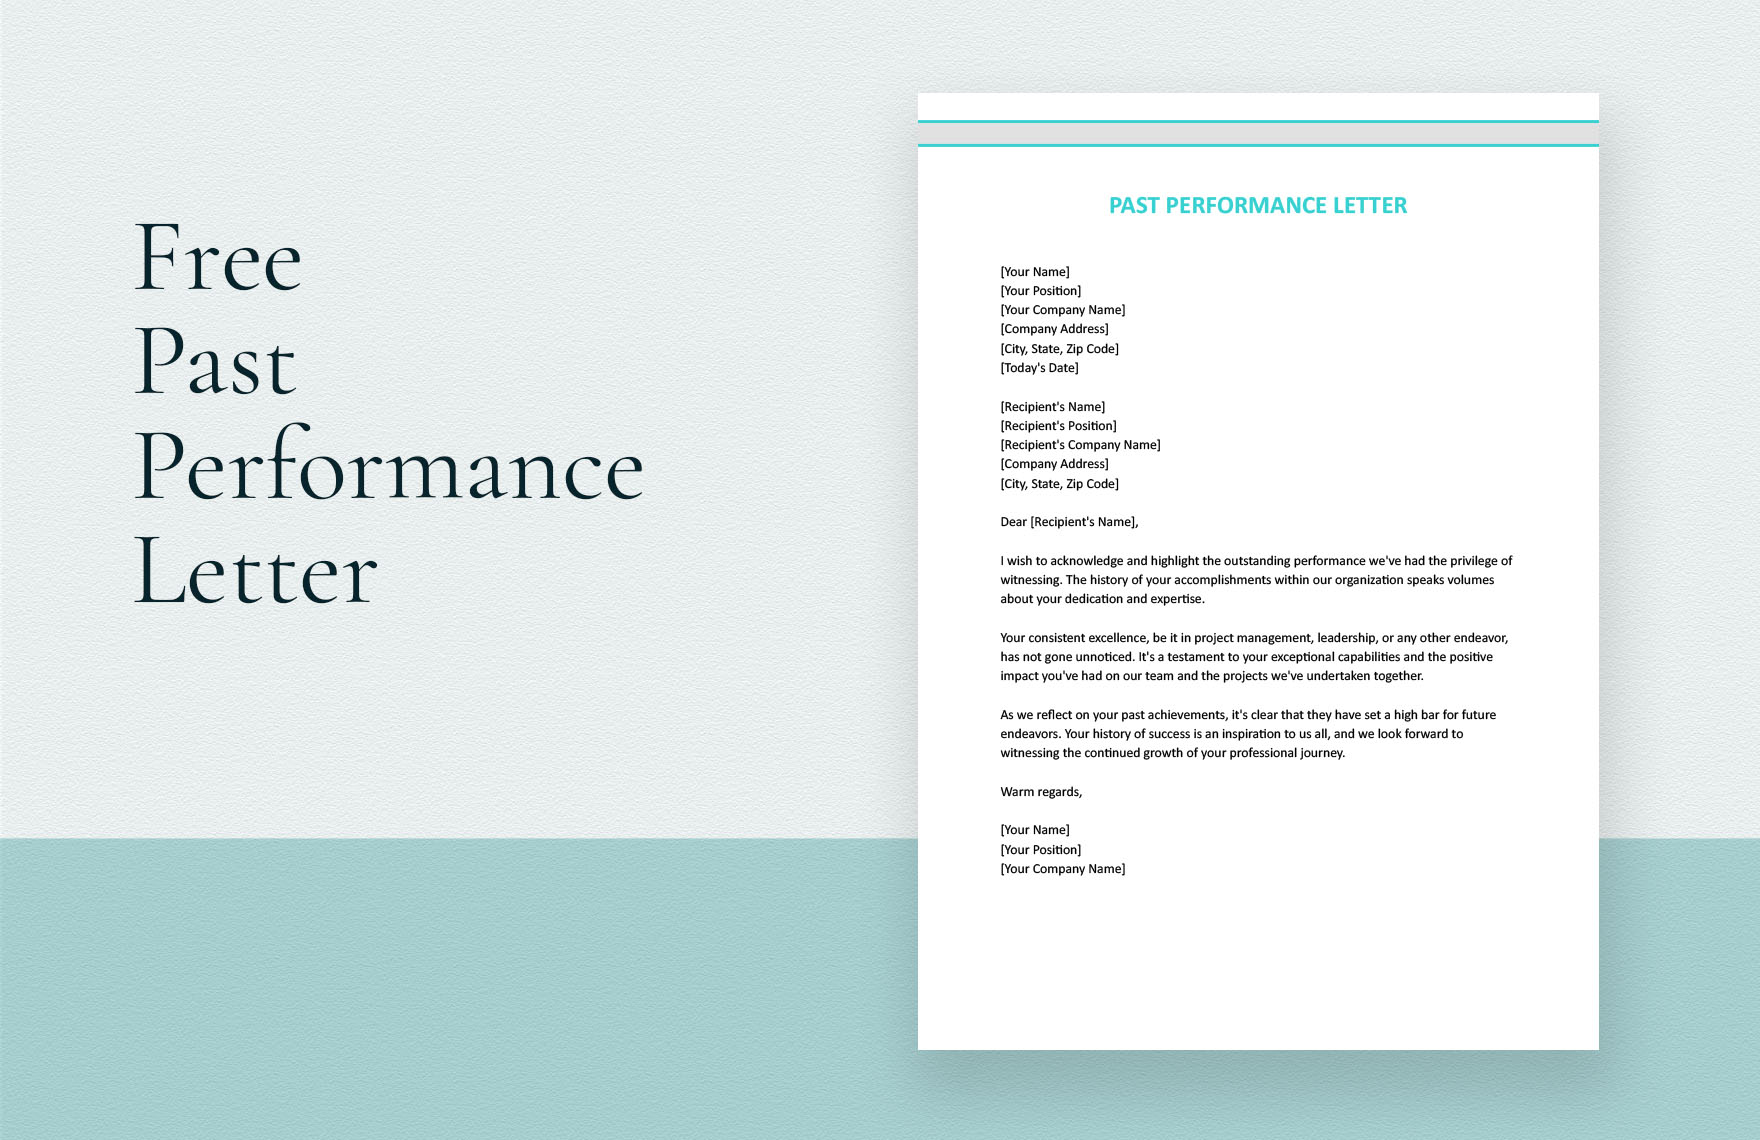 Past Performance Letter in Word, Google Docs